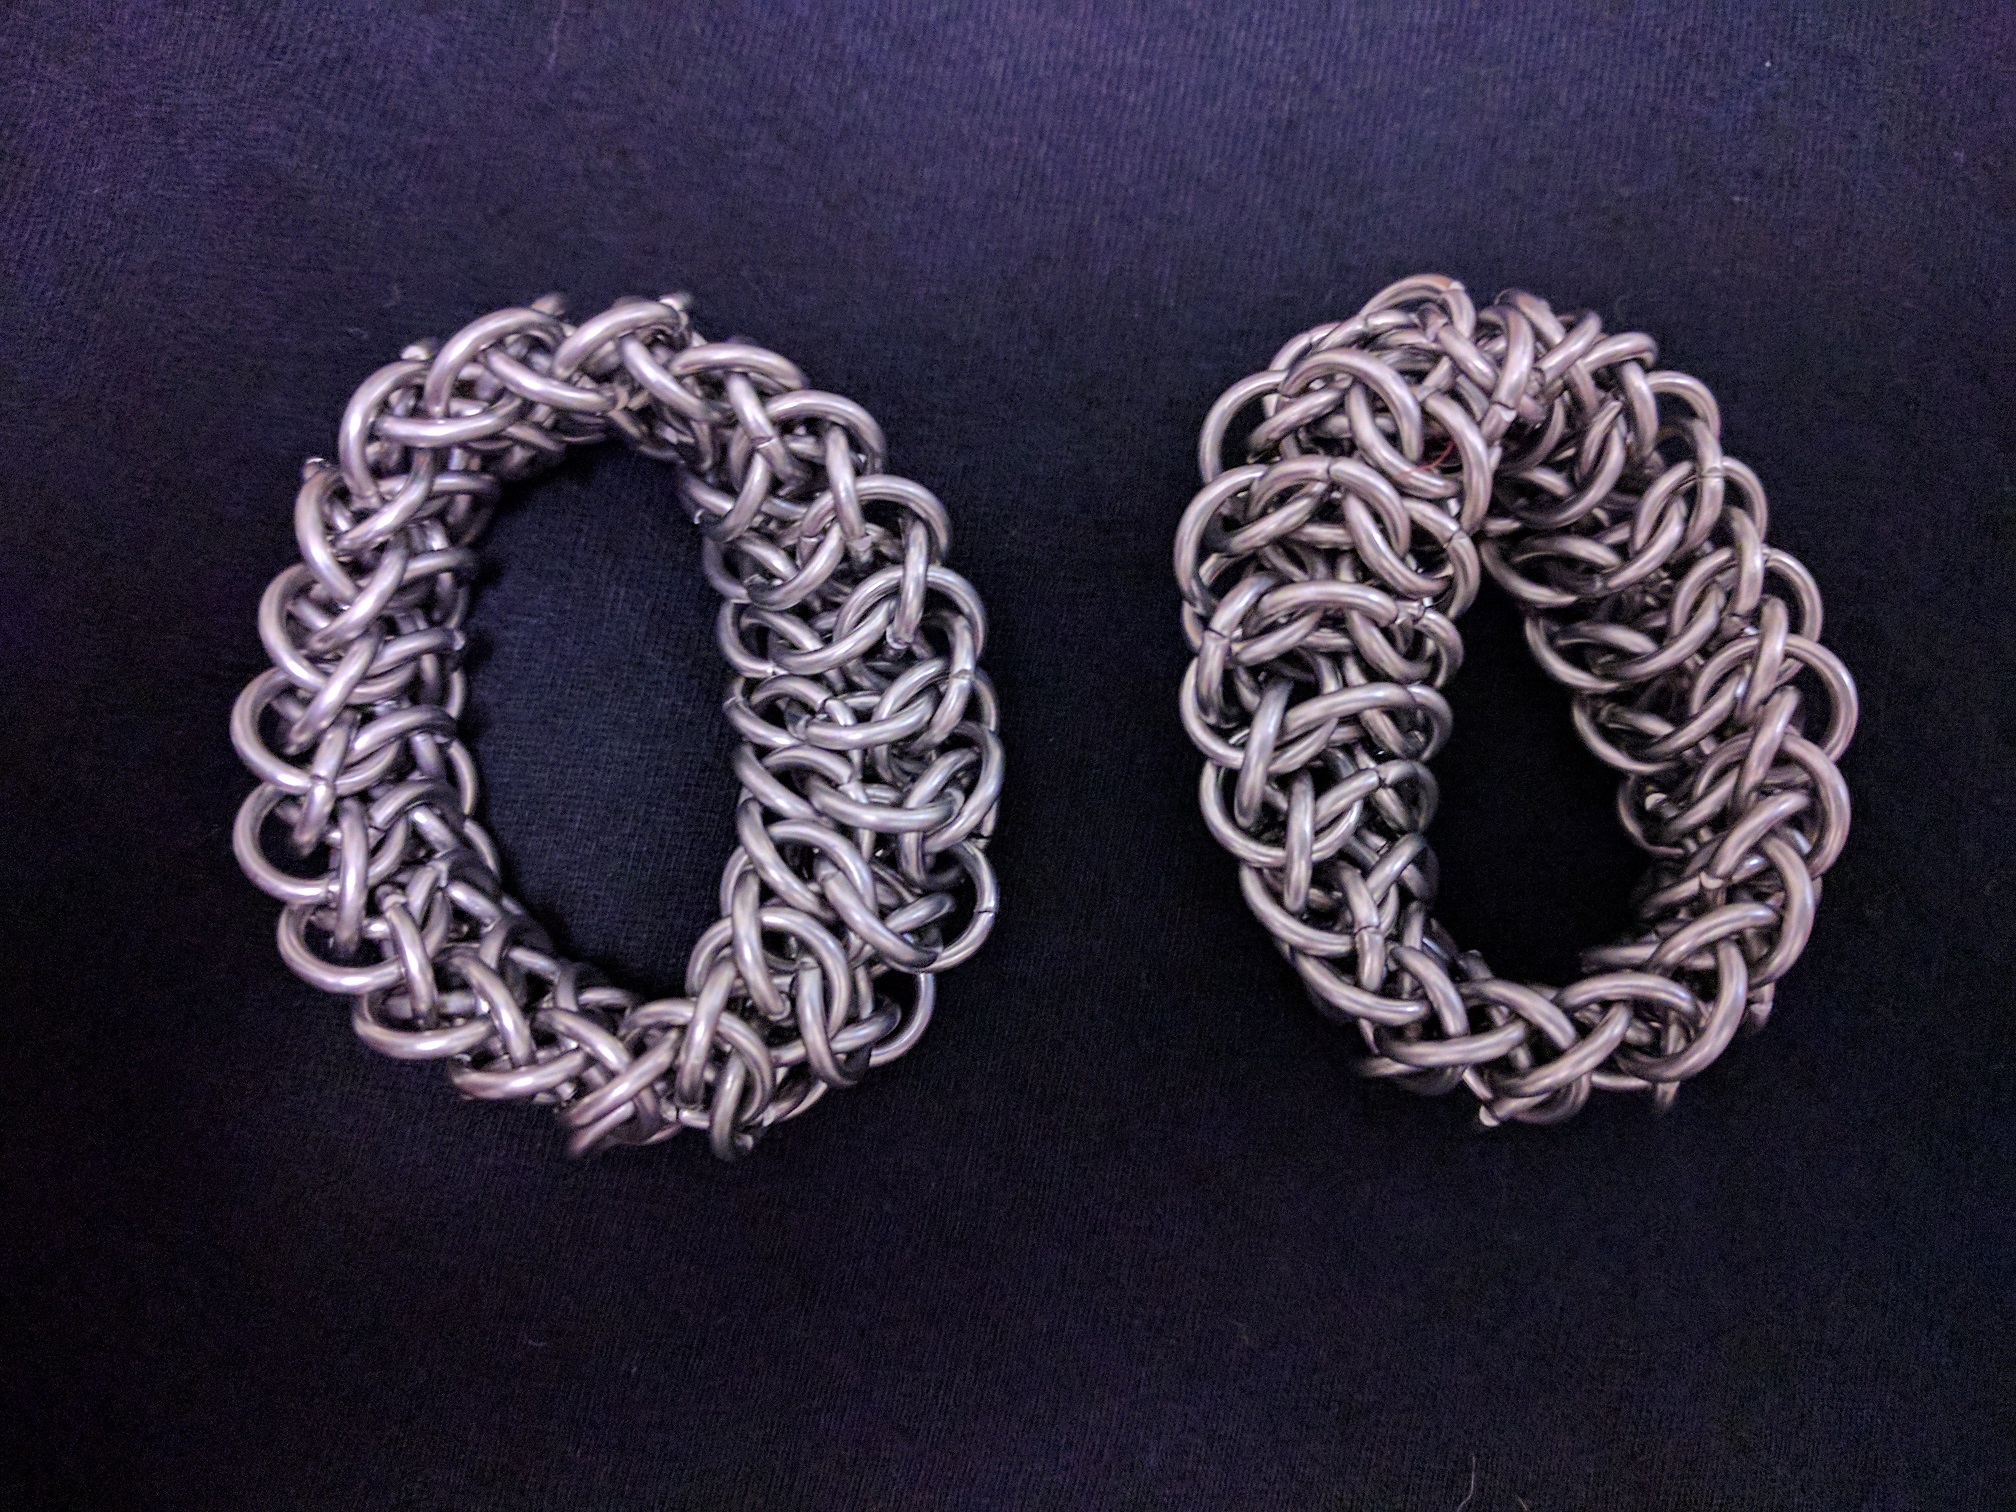 Two coils of a chainmaille mobius strip.